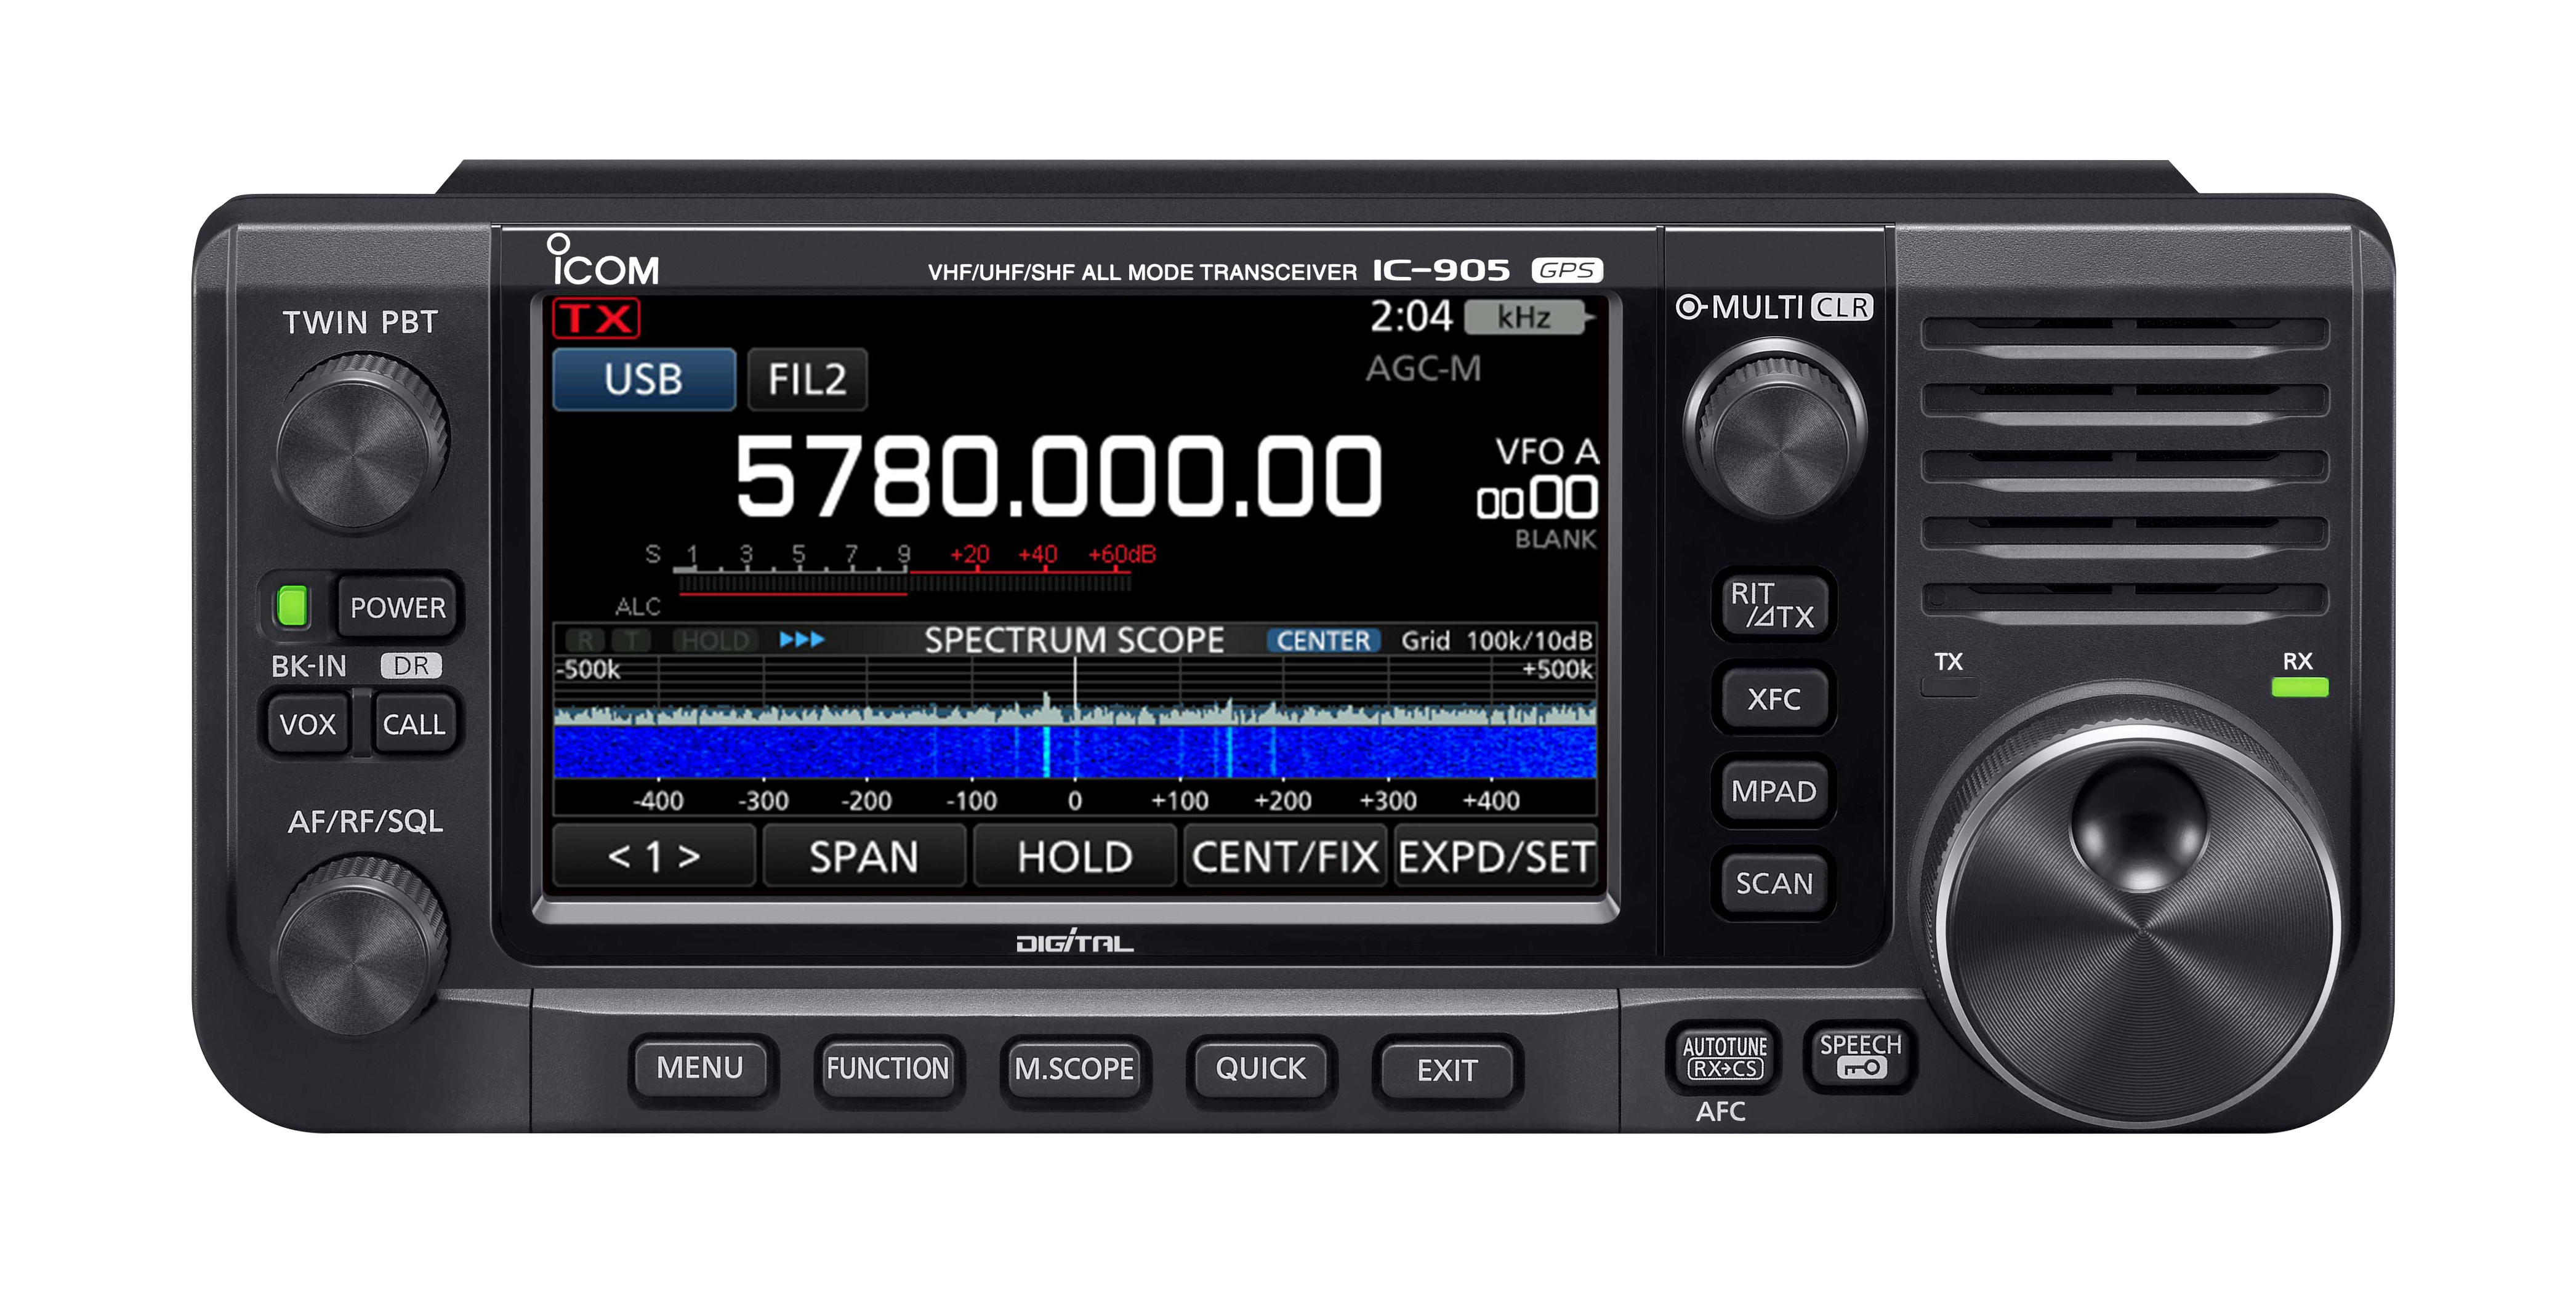 IC-905 VHF/UHF/SHF All Mode Transceiver (Front Image) 